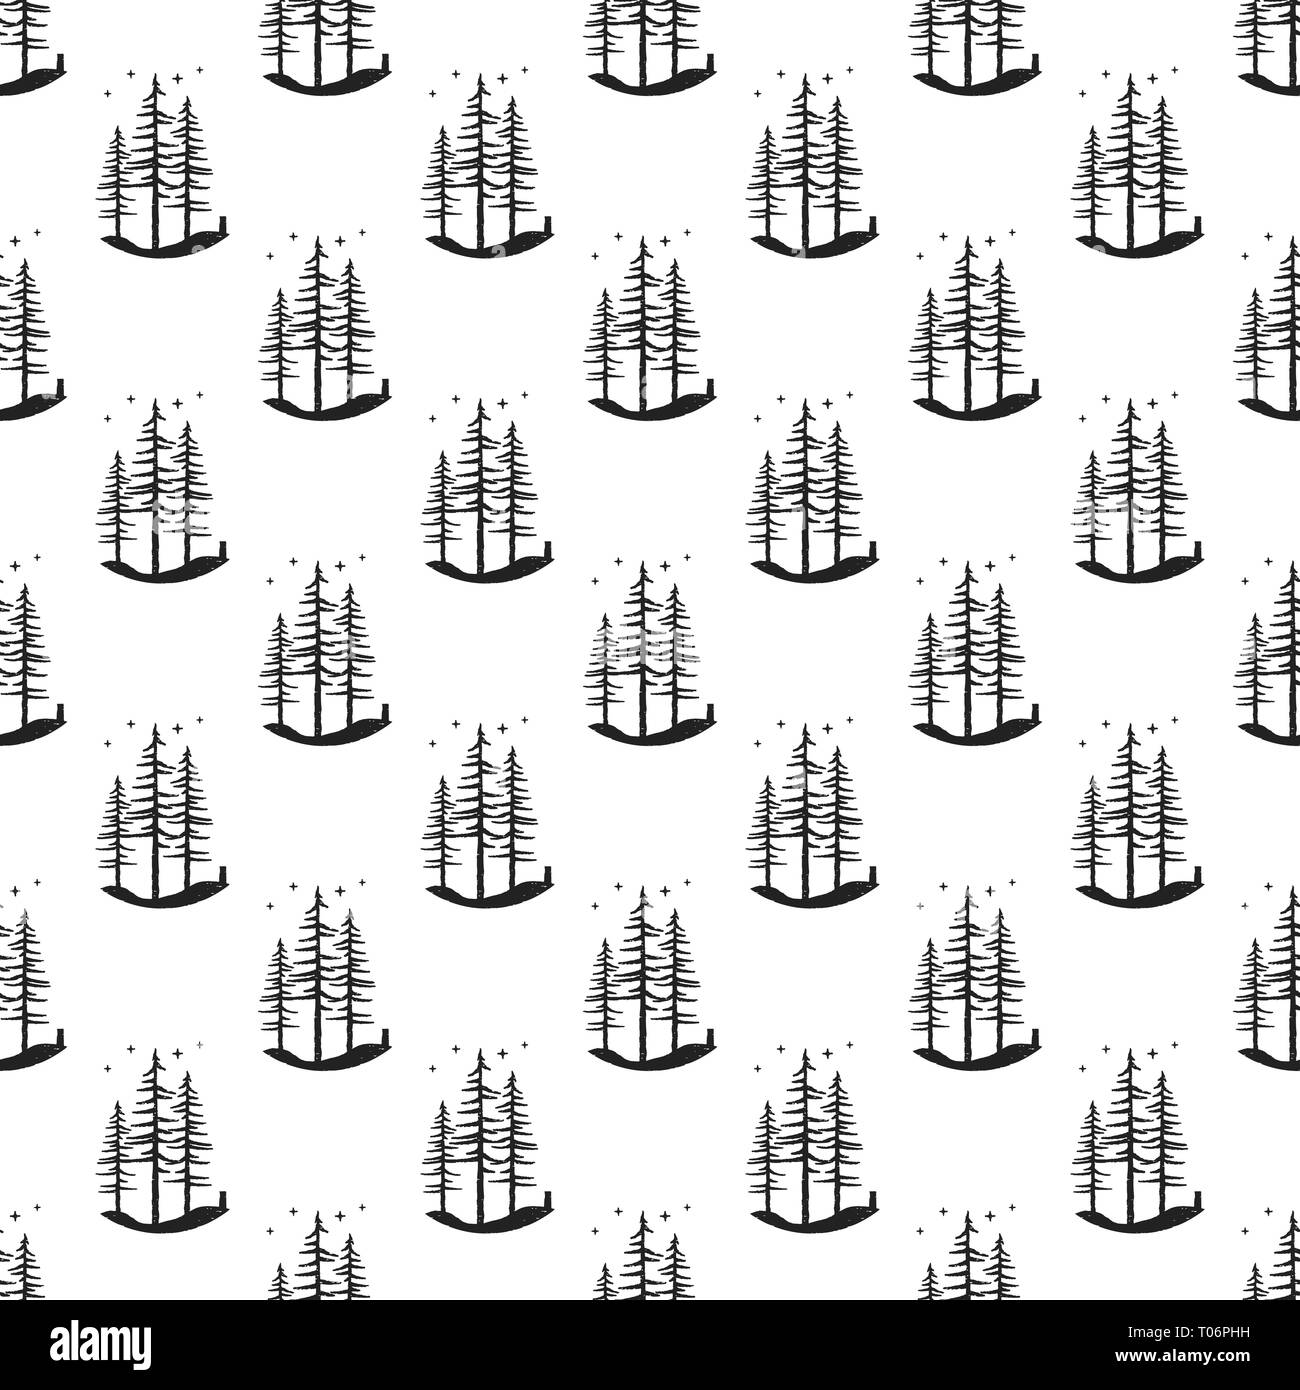 Pine tree pattern background. Simple seamless illustration of monochrome engraved fir trees. Stock vector wallpaper for web or prints isolated Stock Vector